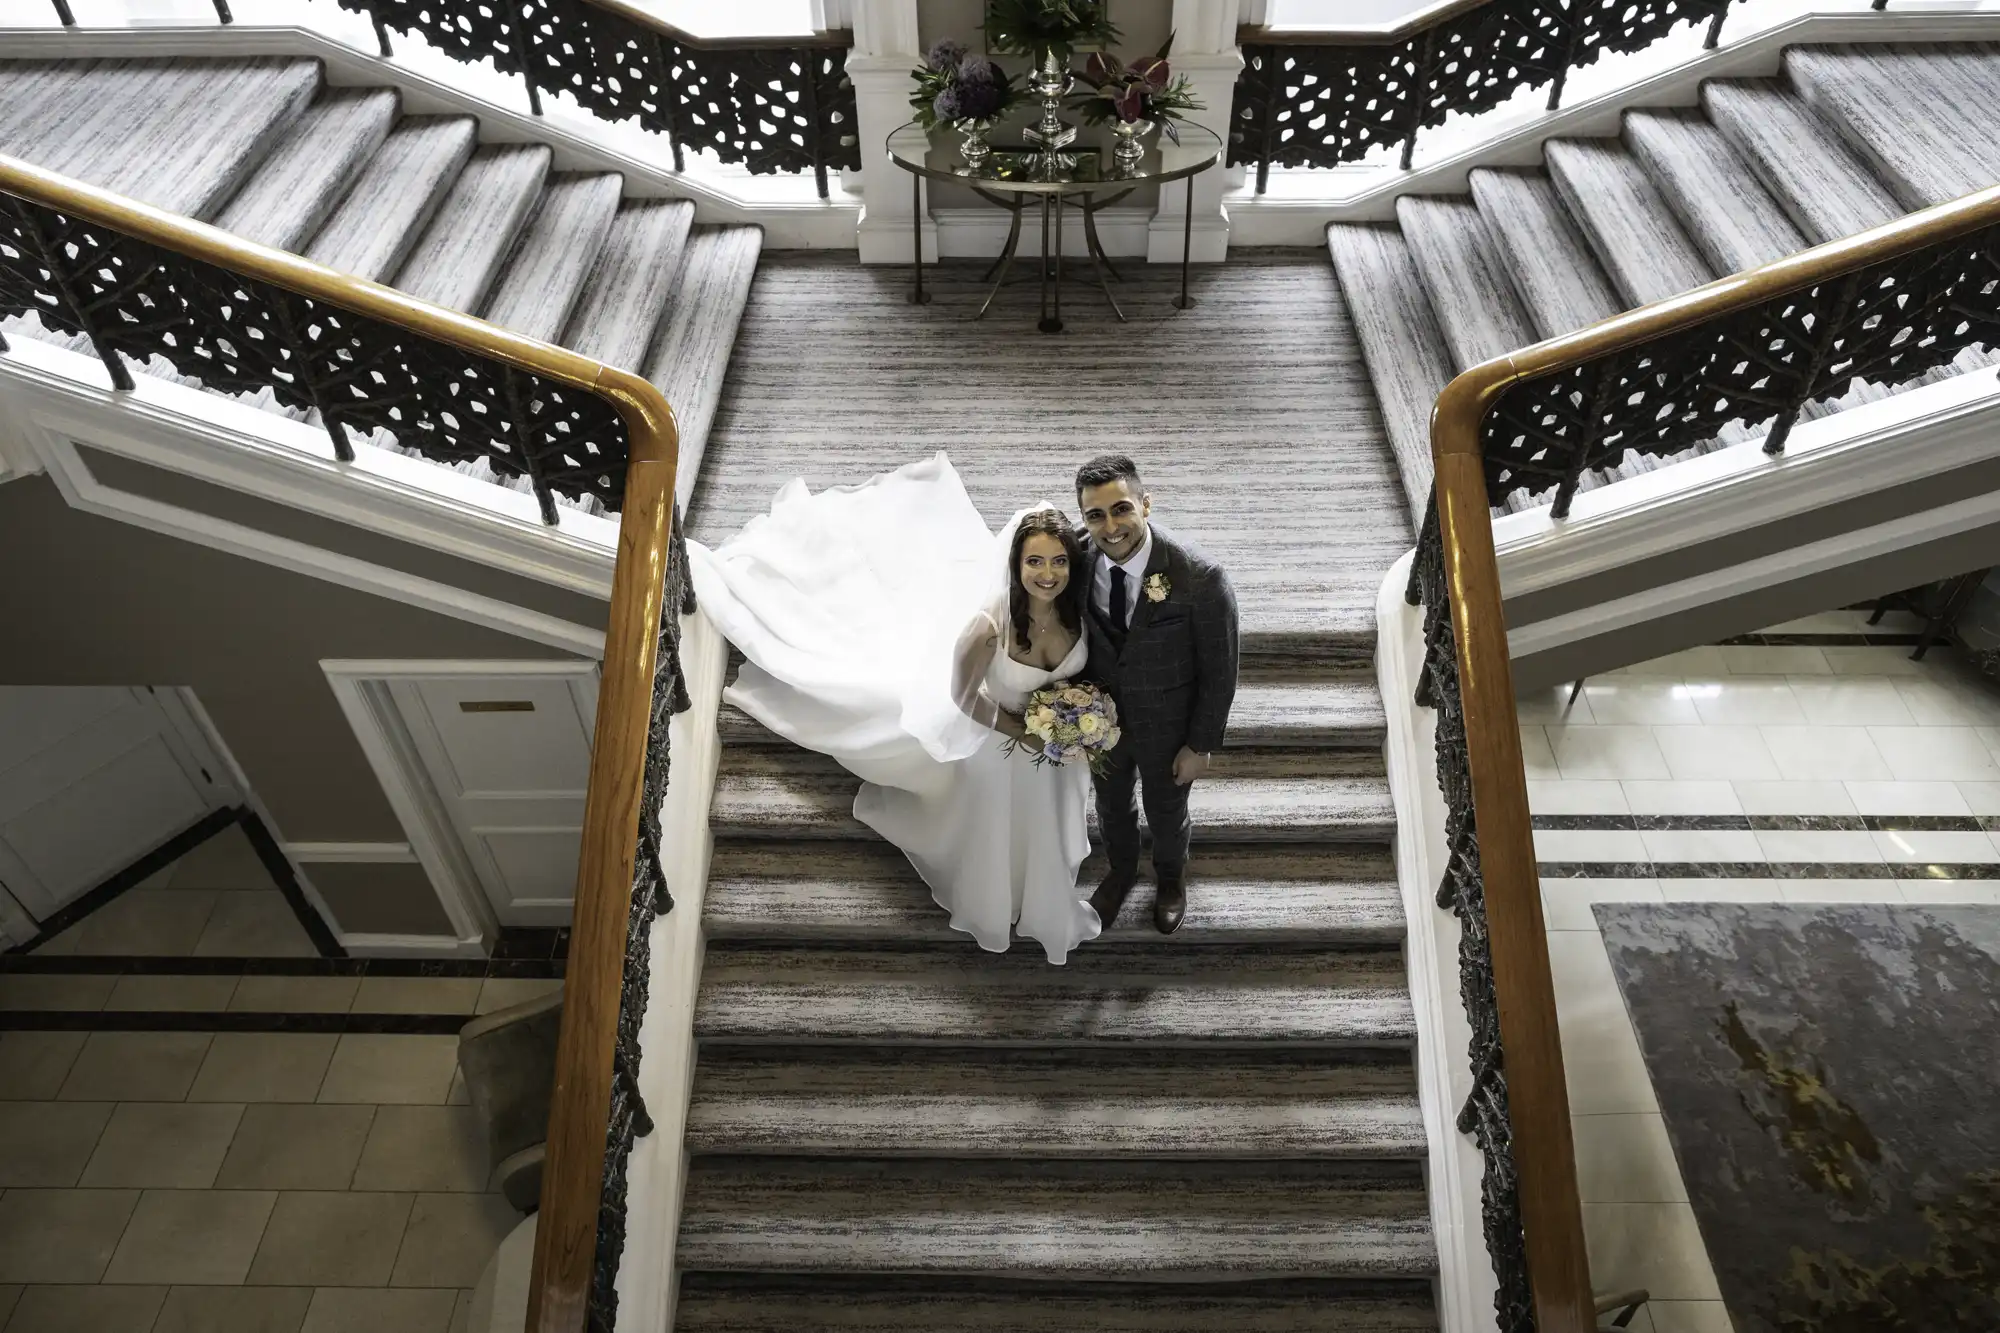 A bride in a long white dress and a groom in a suit descend a grand staircase, smiling, in an elegant lobby.